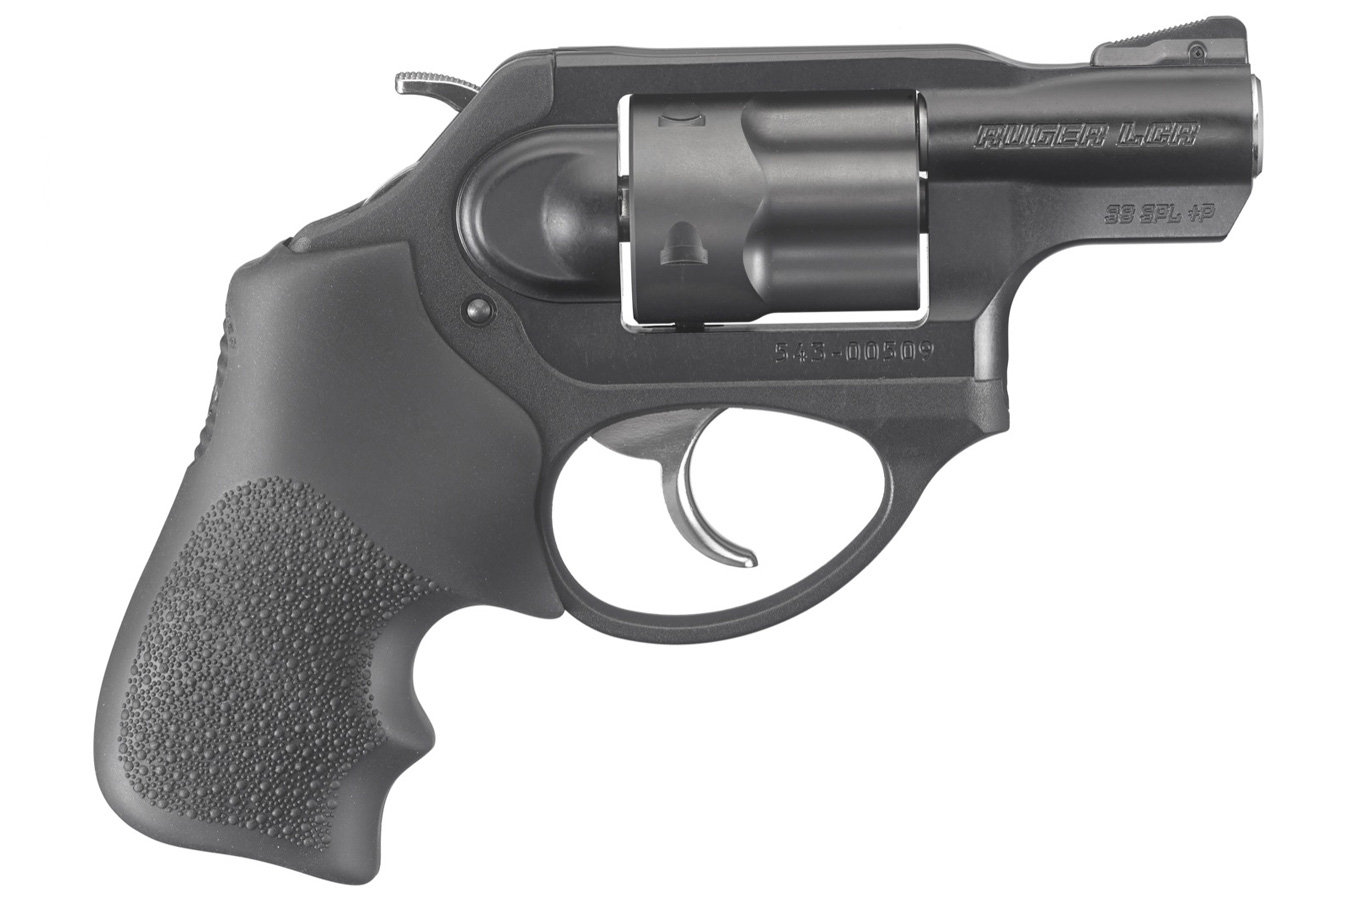 No. 13 Best Selling: RUGER LCR-X 38SPL DOUBLE ACTION REVOLVER